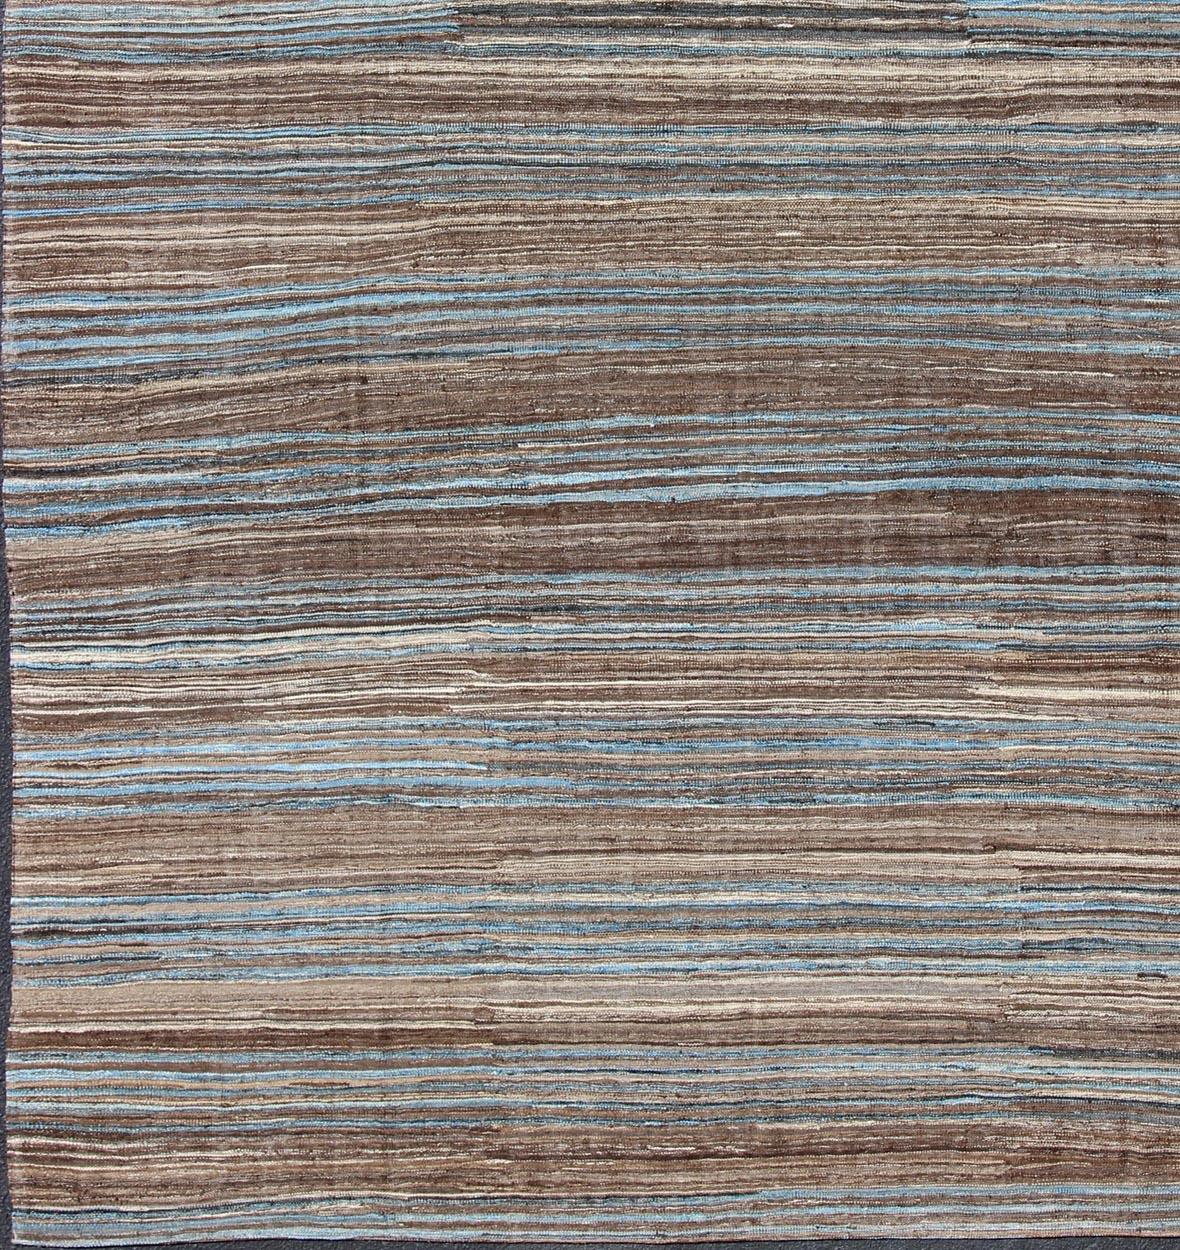 Versatile flat-weave Kilim for a Modern interiors as well as casual interiors or any Classic design
Flat-weave Kilim rug, Keivan Woven Arts / rug afg-27812, country of origin / type: Afghanistan / Kilim

This beautiful blue and brown composition